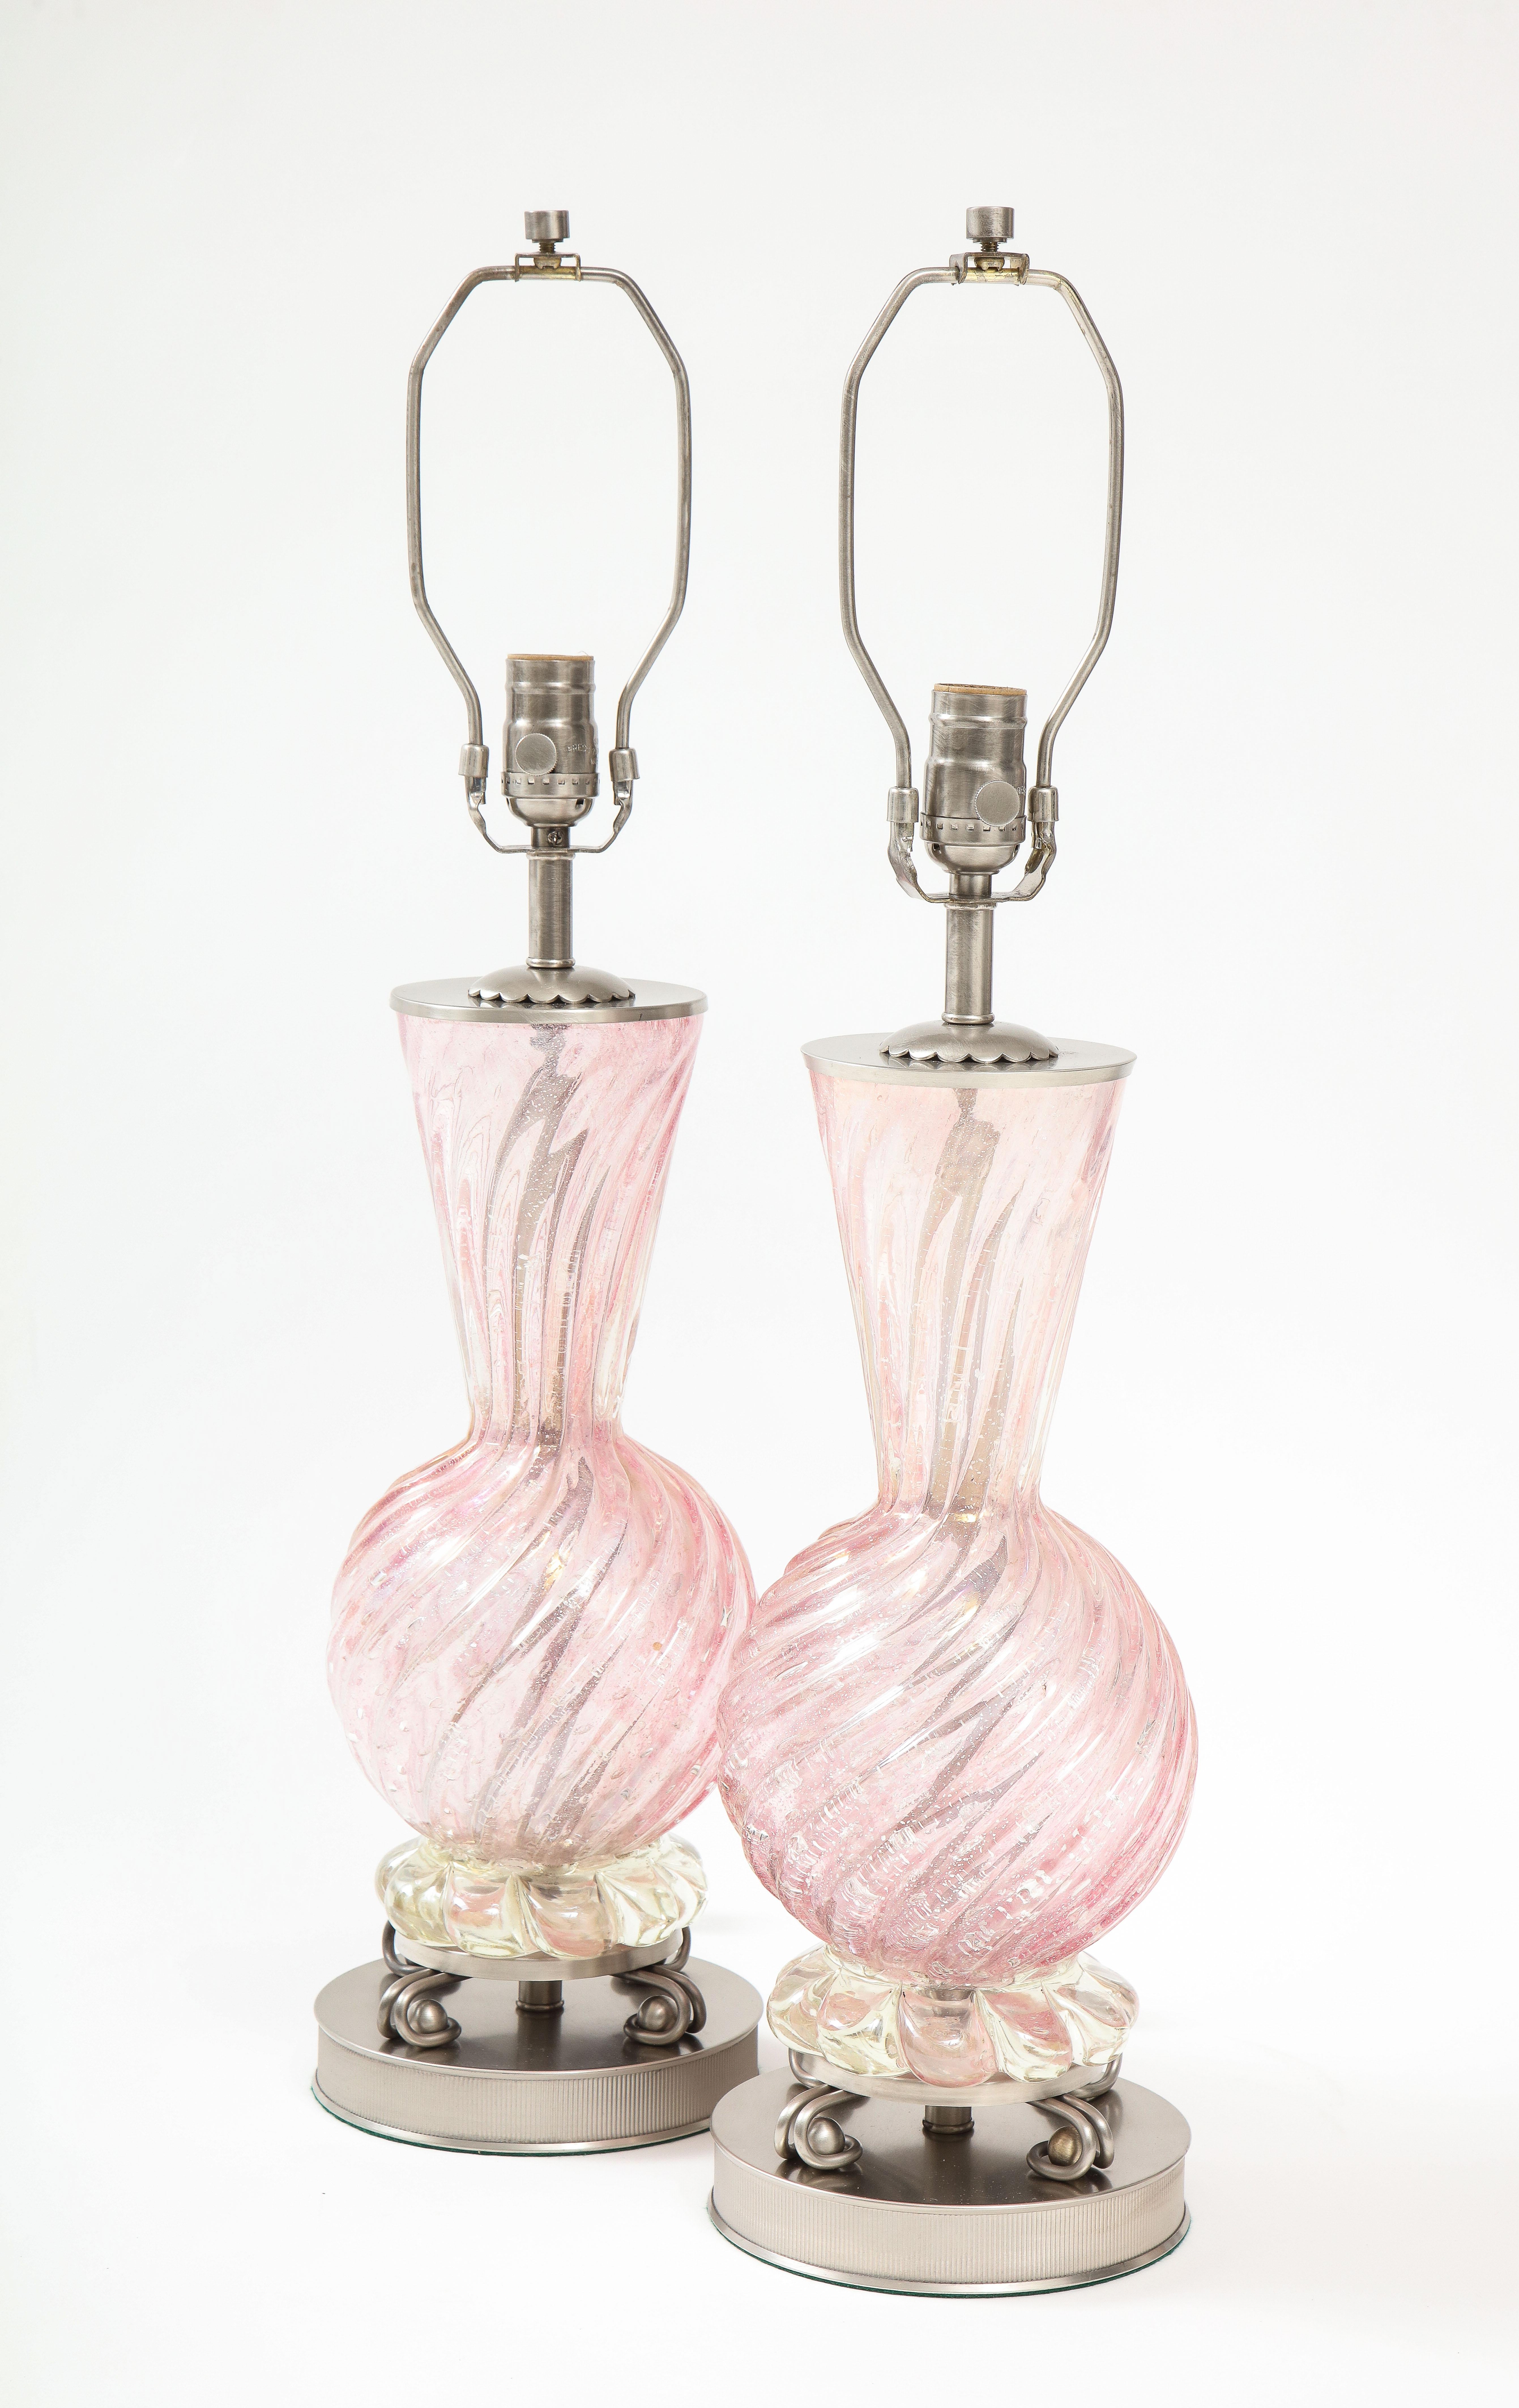 Pair of Mid Century/Art Deco Murano glass lamps in a pale pink featuring a swirl blown pattern and silver dust inclusions. Glass lamps sit on polished nickel bases. Rewired for use in USA, 100W max bulbs.